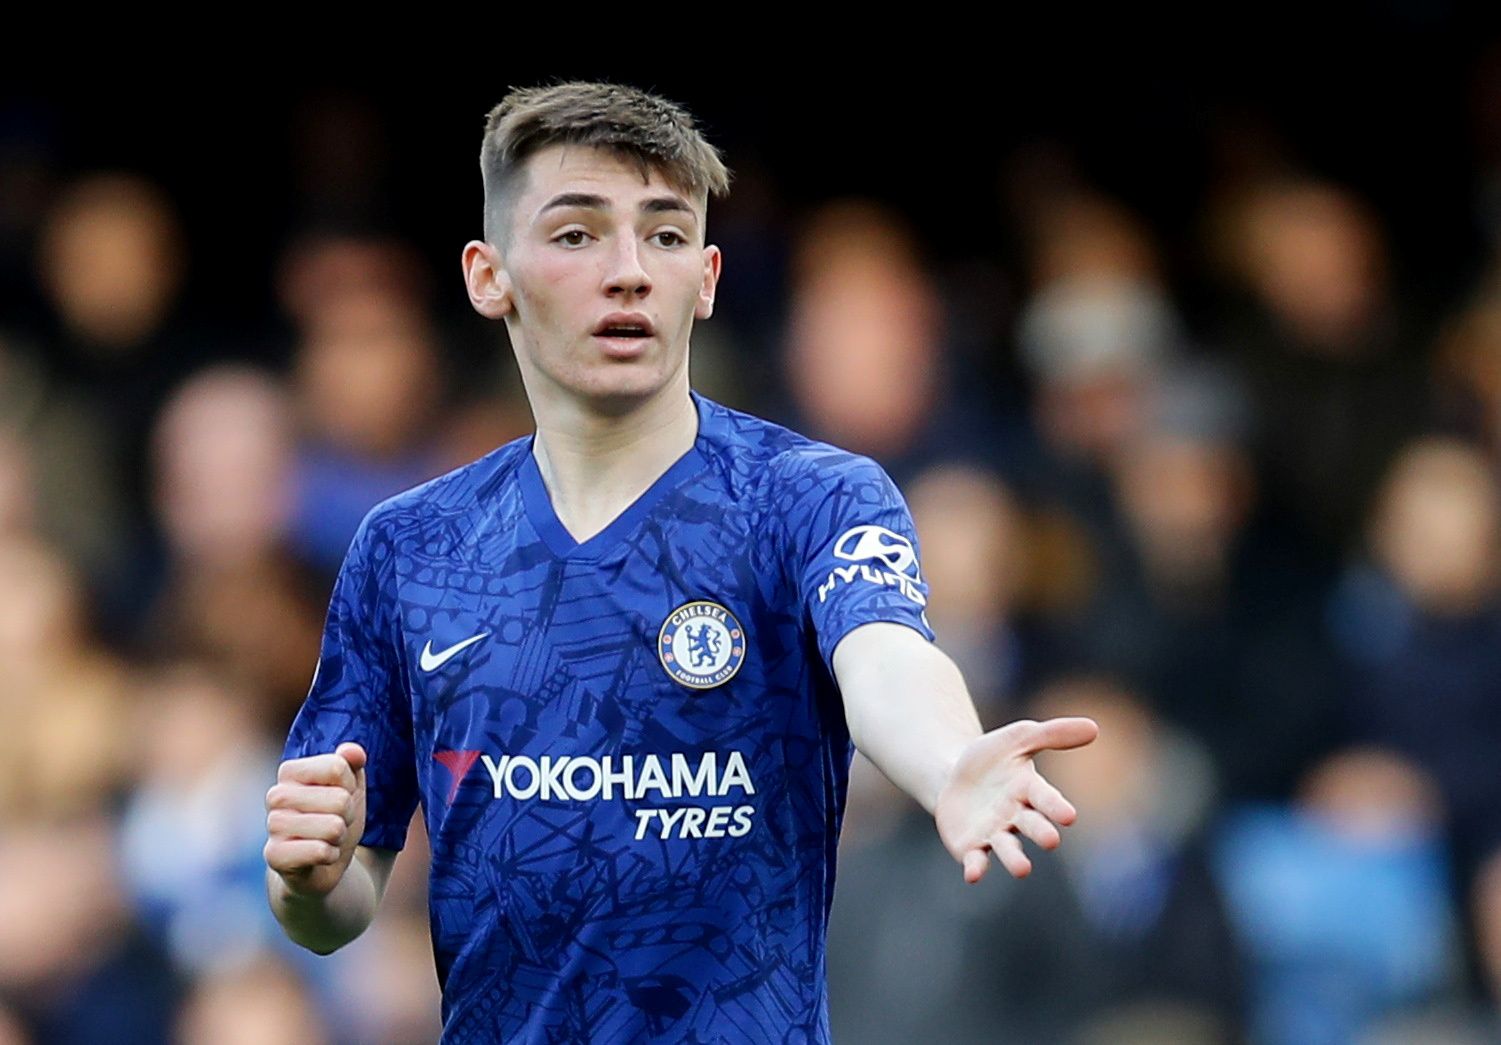 Soccer Football - Premier League - Chelsea v Everton - Stamford Bridge, London, Britain - March 8, 2020  Chelsea's Billy Gilmour   REUTERS/David Klein  EDITORIAL USE ONLY. No use with unauthorized audio, video, data, fixture lists, club/league logos or 